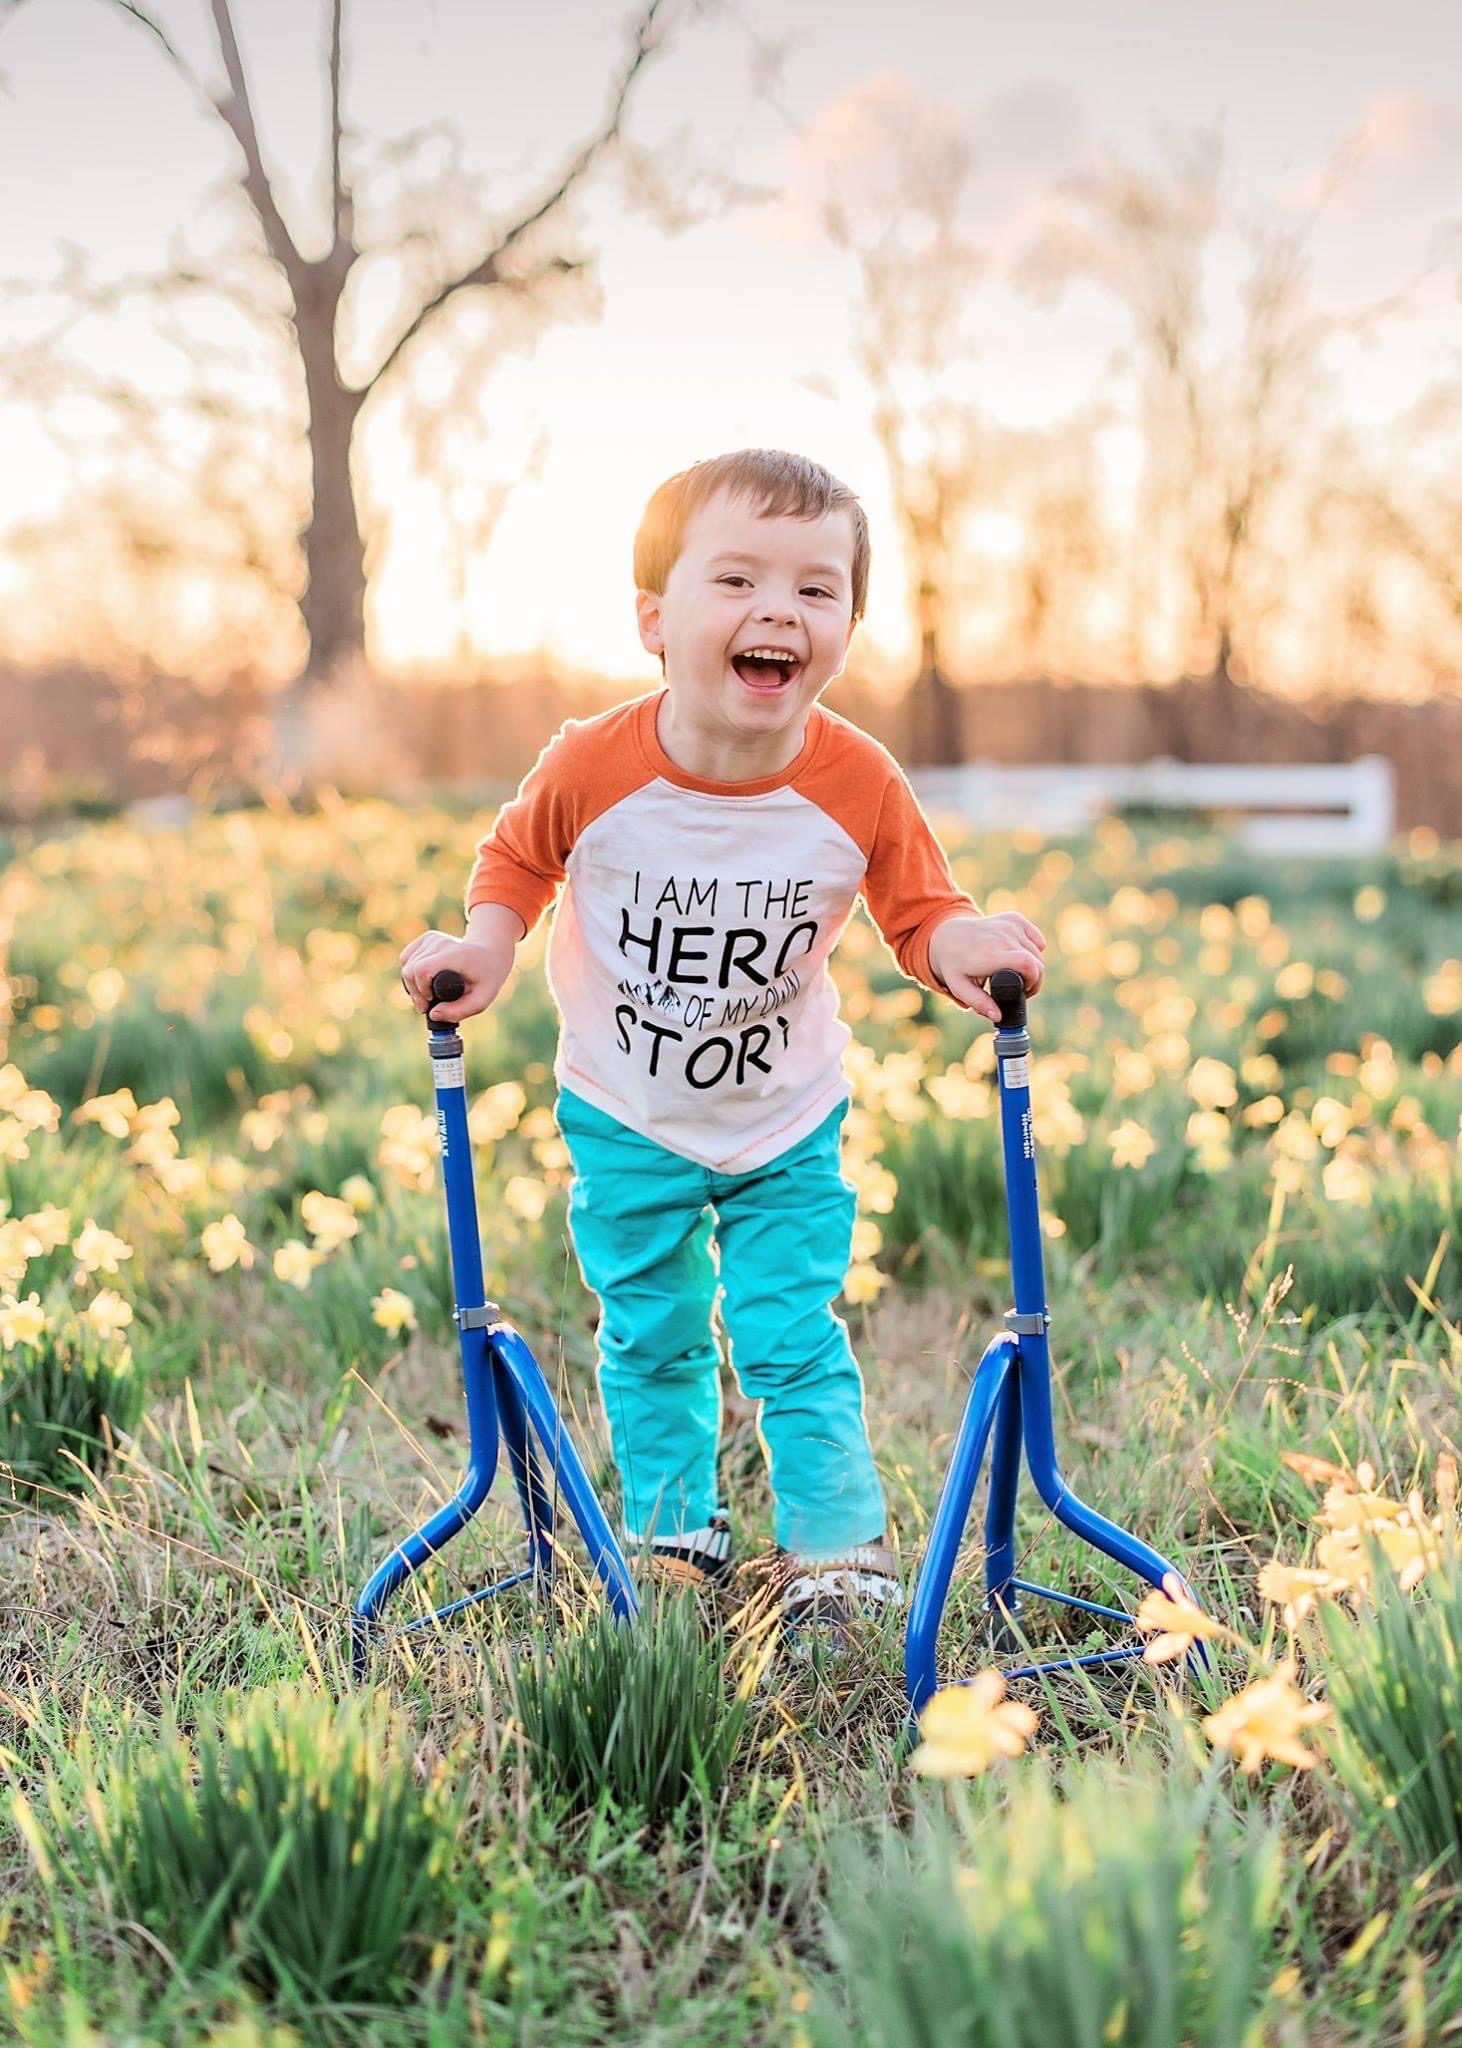 A young boy who had SDR. He is smiling and using blue tripod canes. His shirt says, I am the hero of my own story.